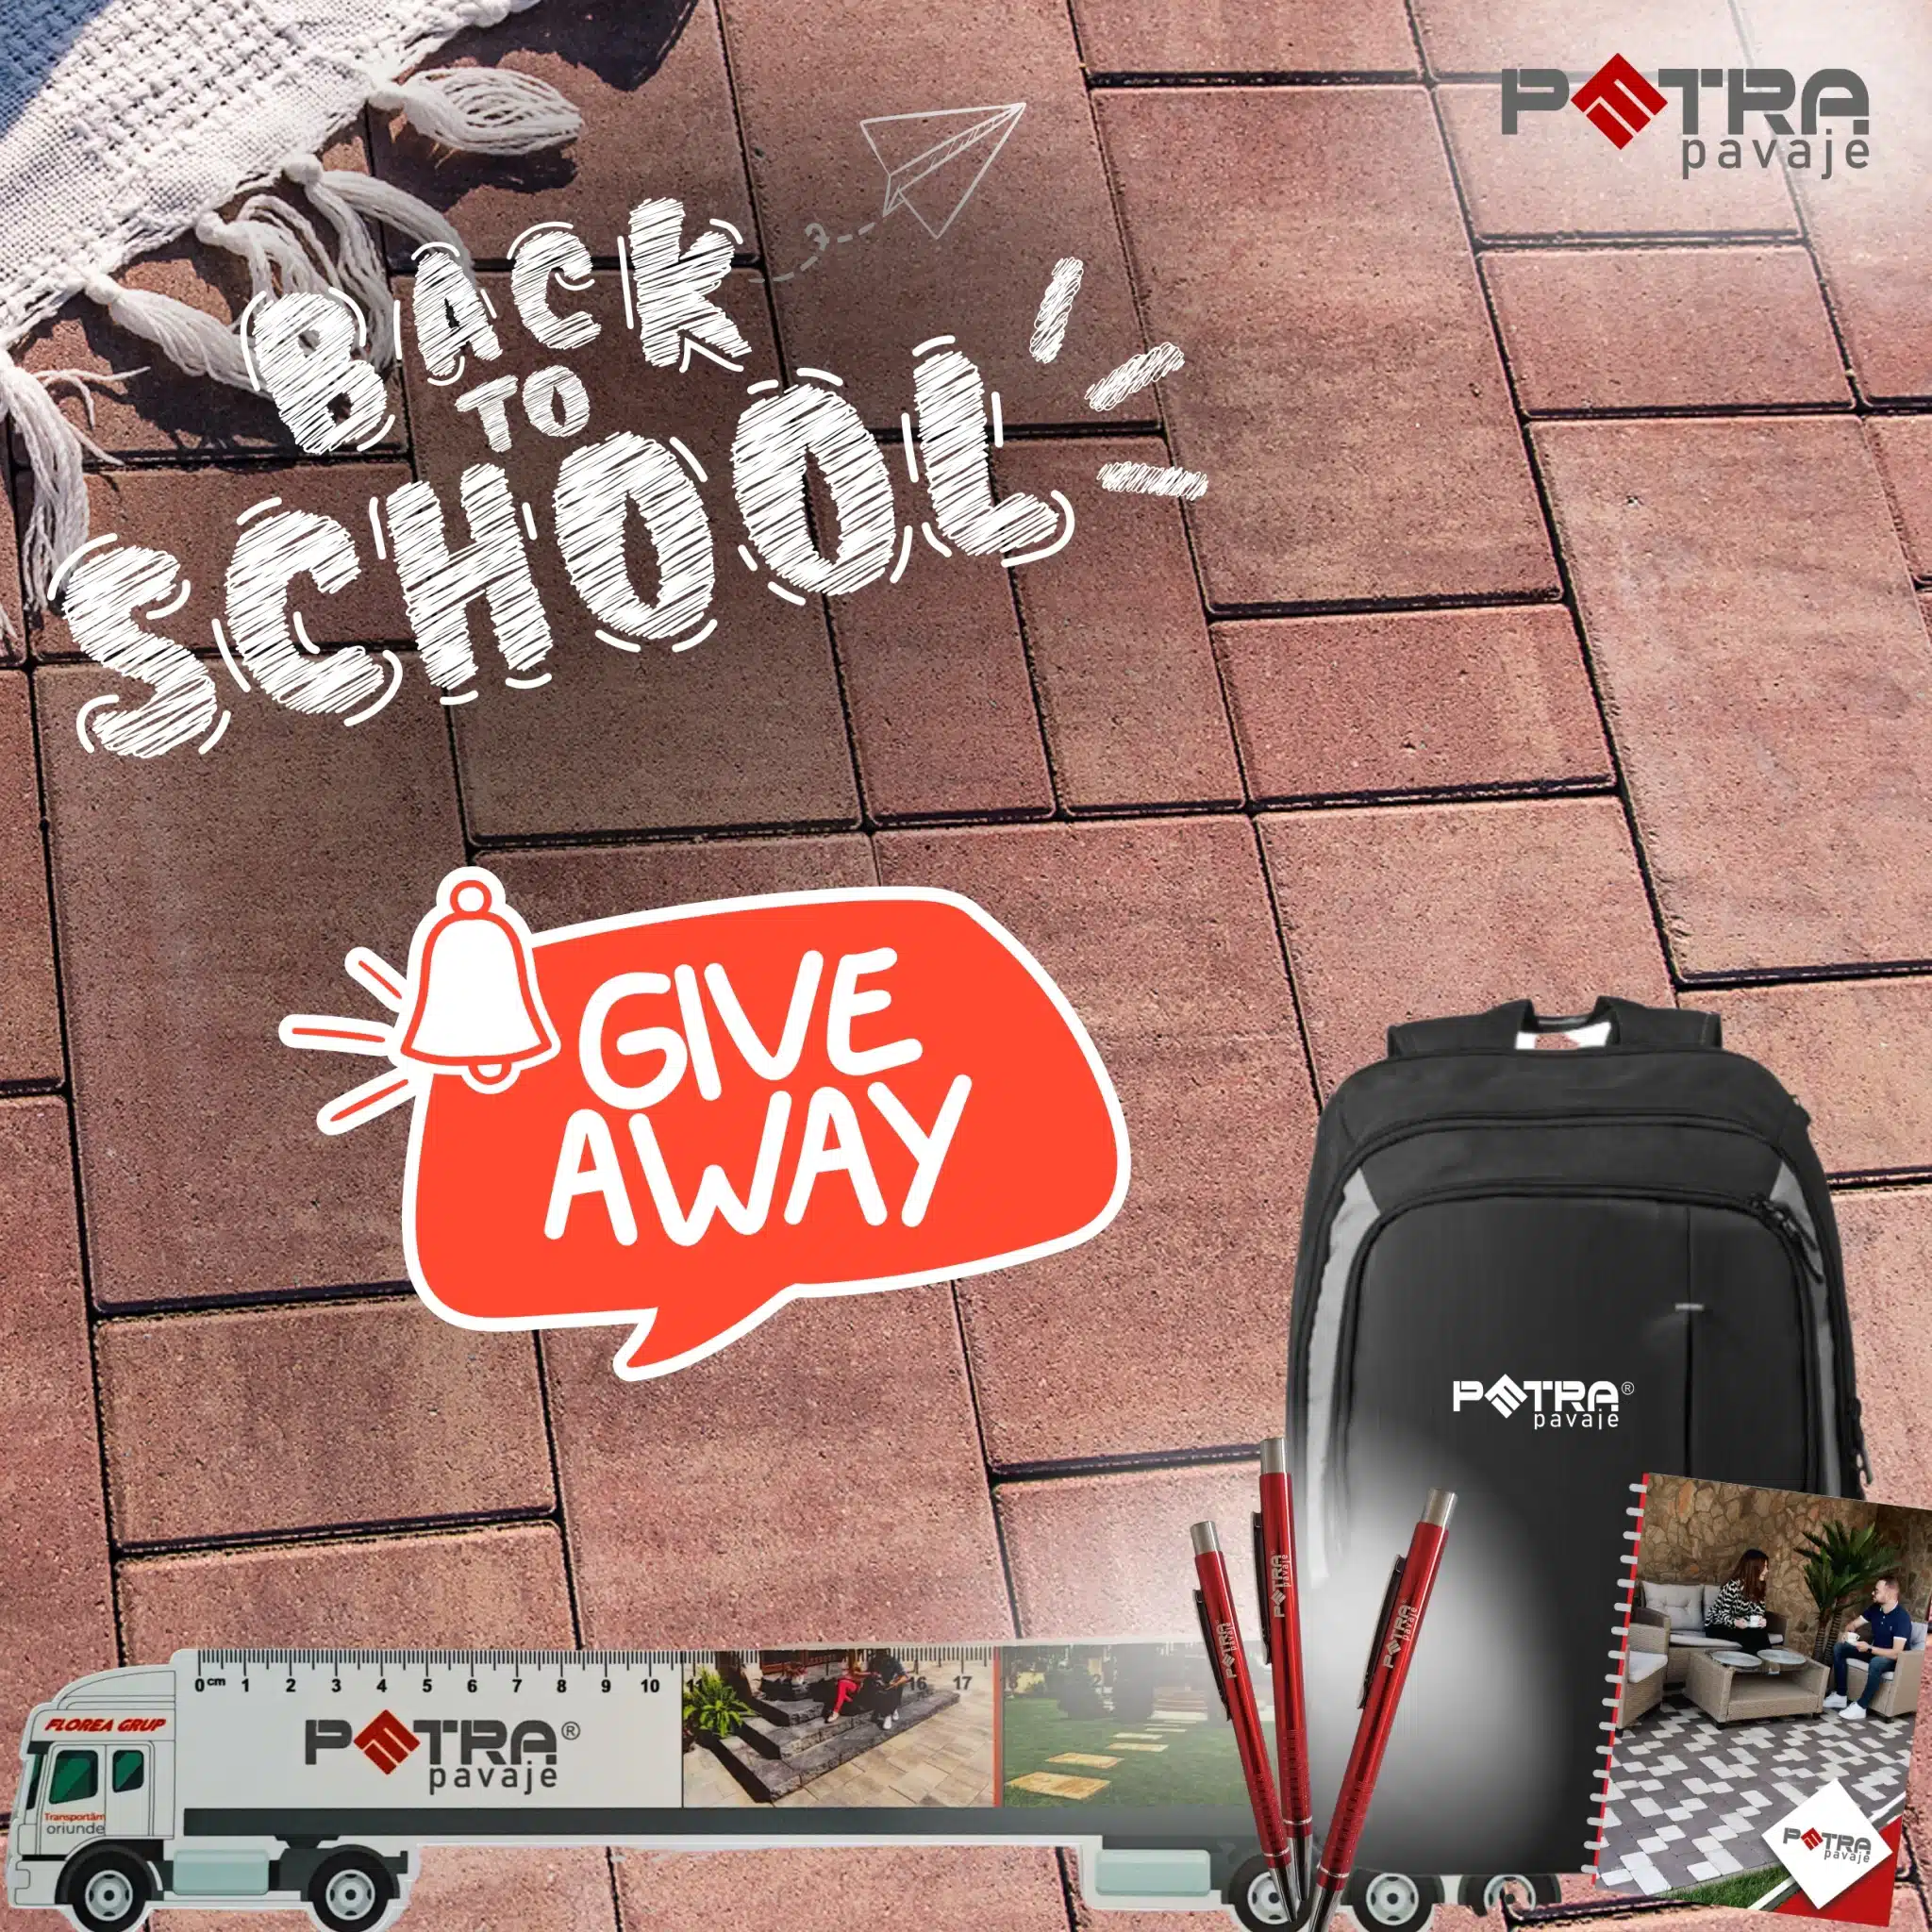 GIveaway Back to School - Petra Pavaje